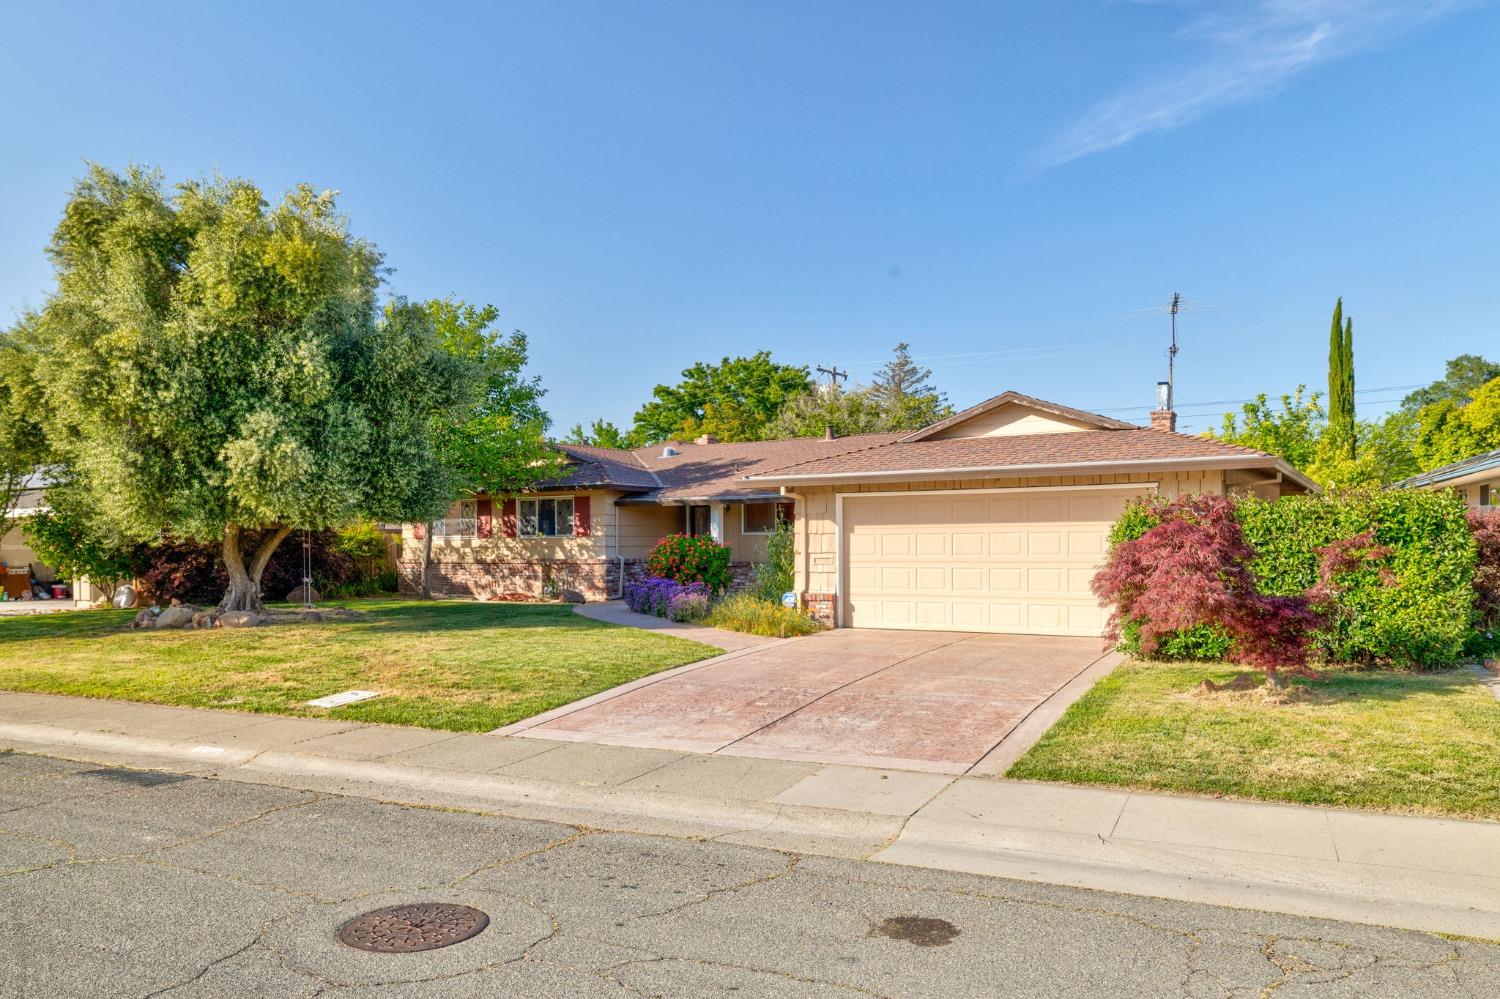 This charming 1960's ranch style home on a large 1/4 acre lot in the highly sought after neighborhoo